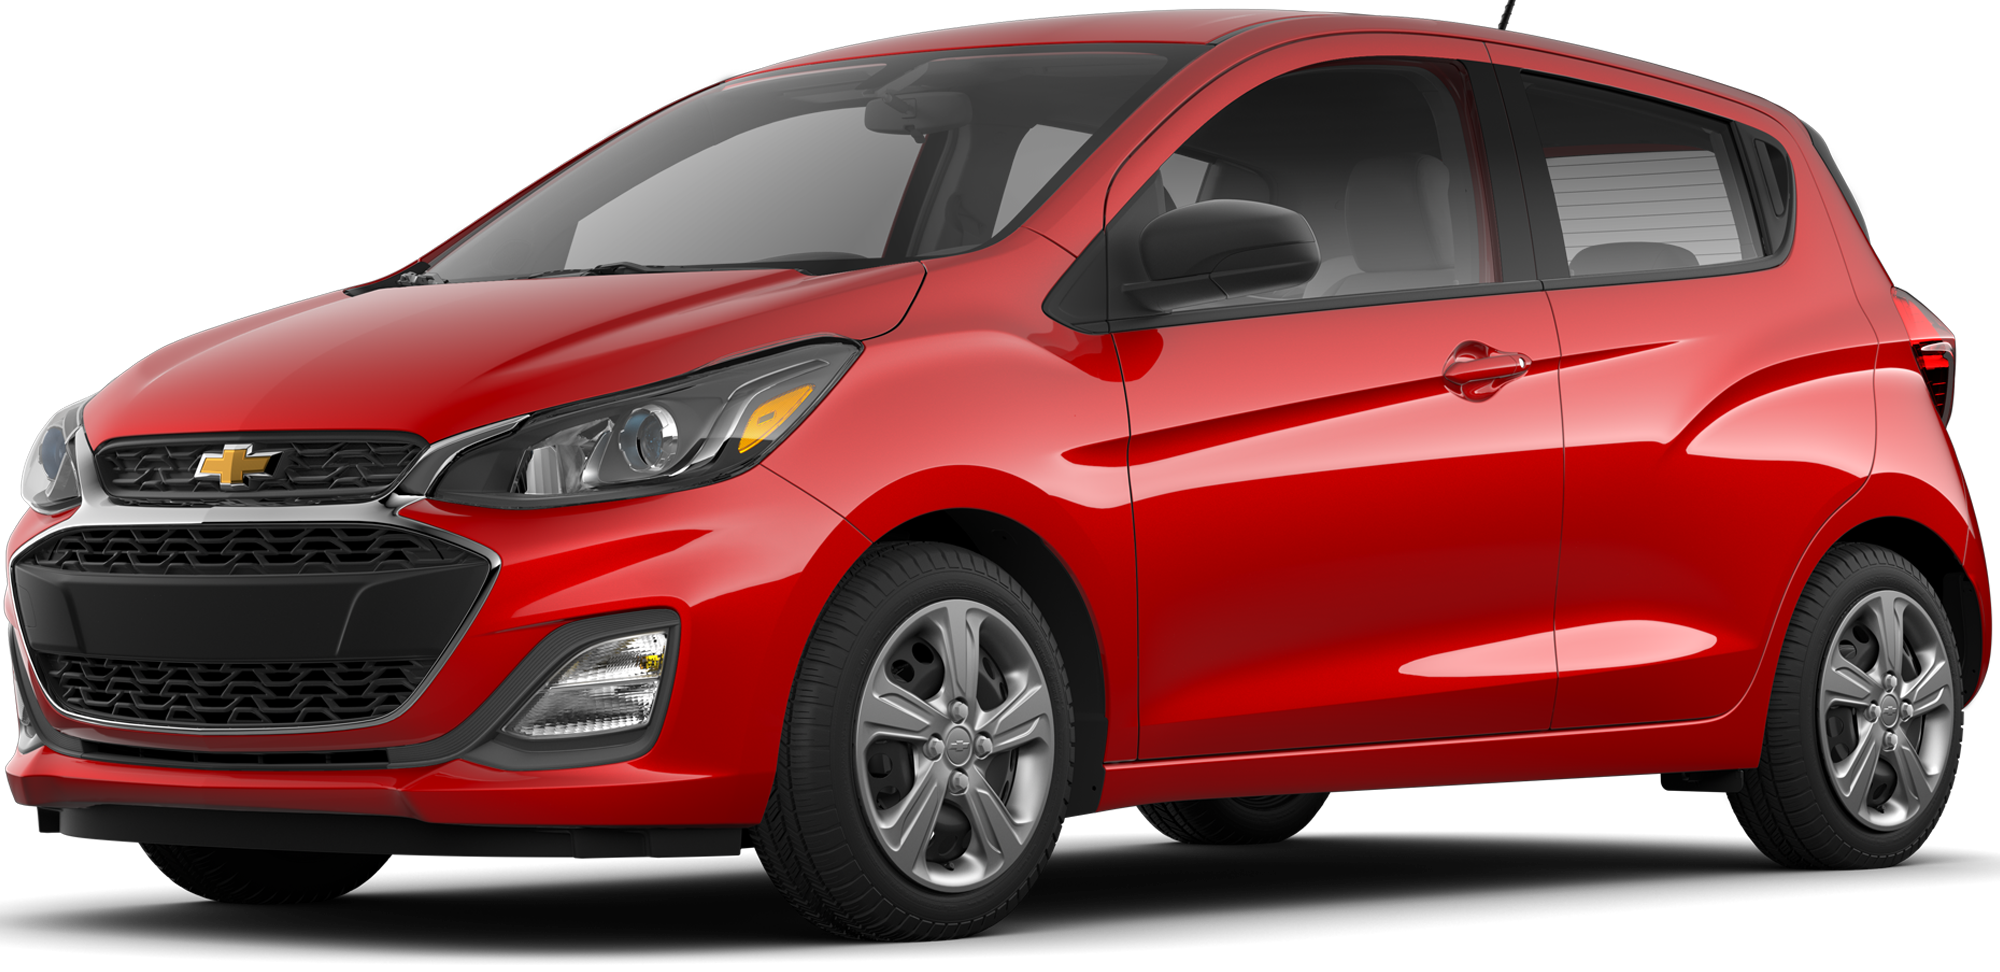 2020 Chevrolet Spark Incentives, Specials & Offers in Cortland NY